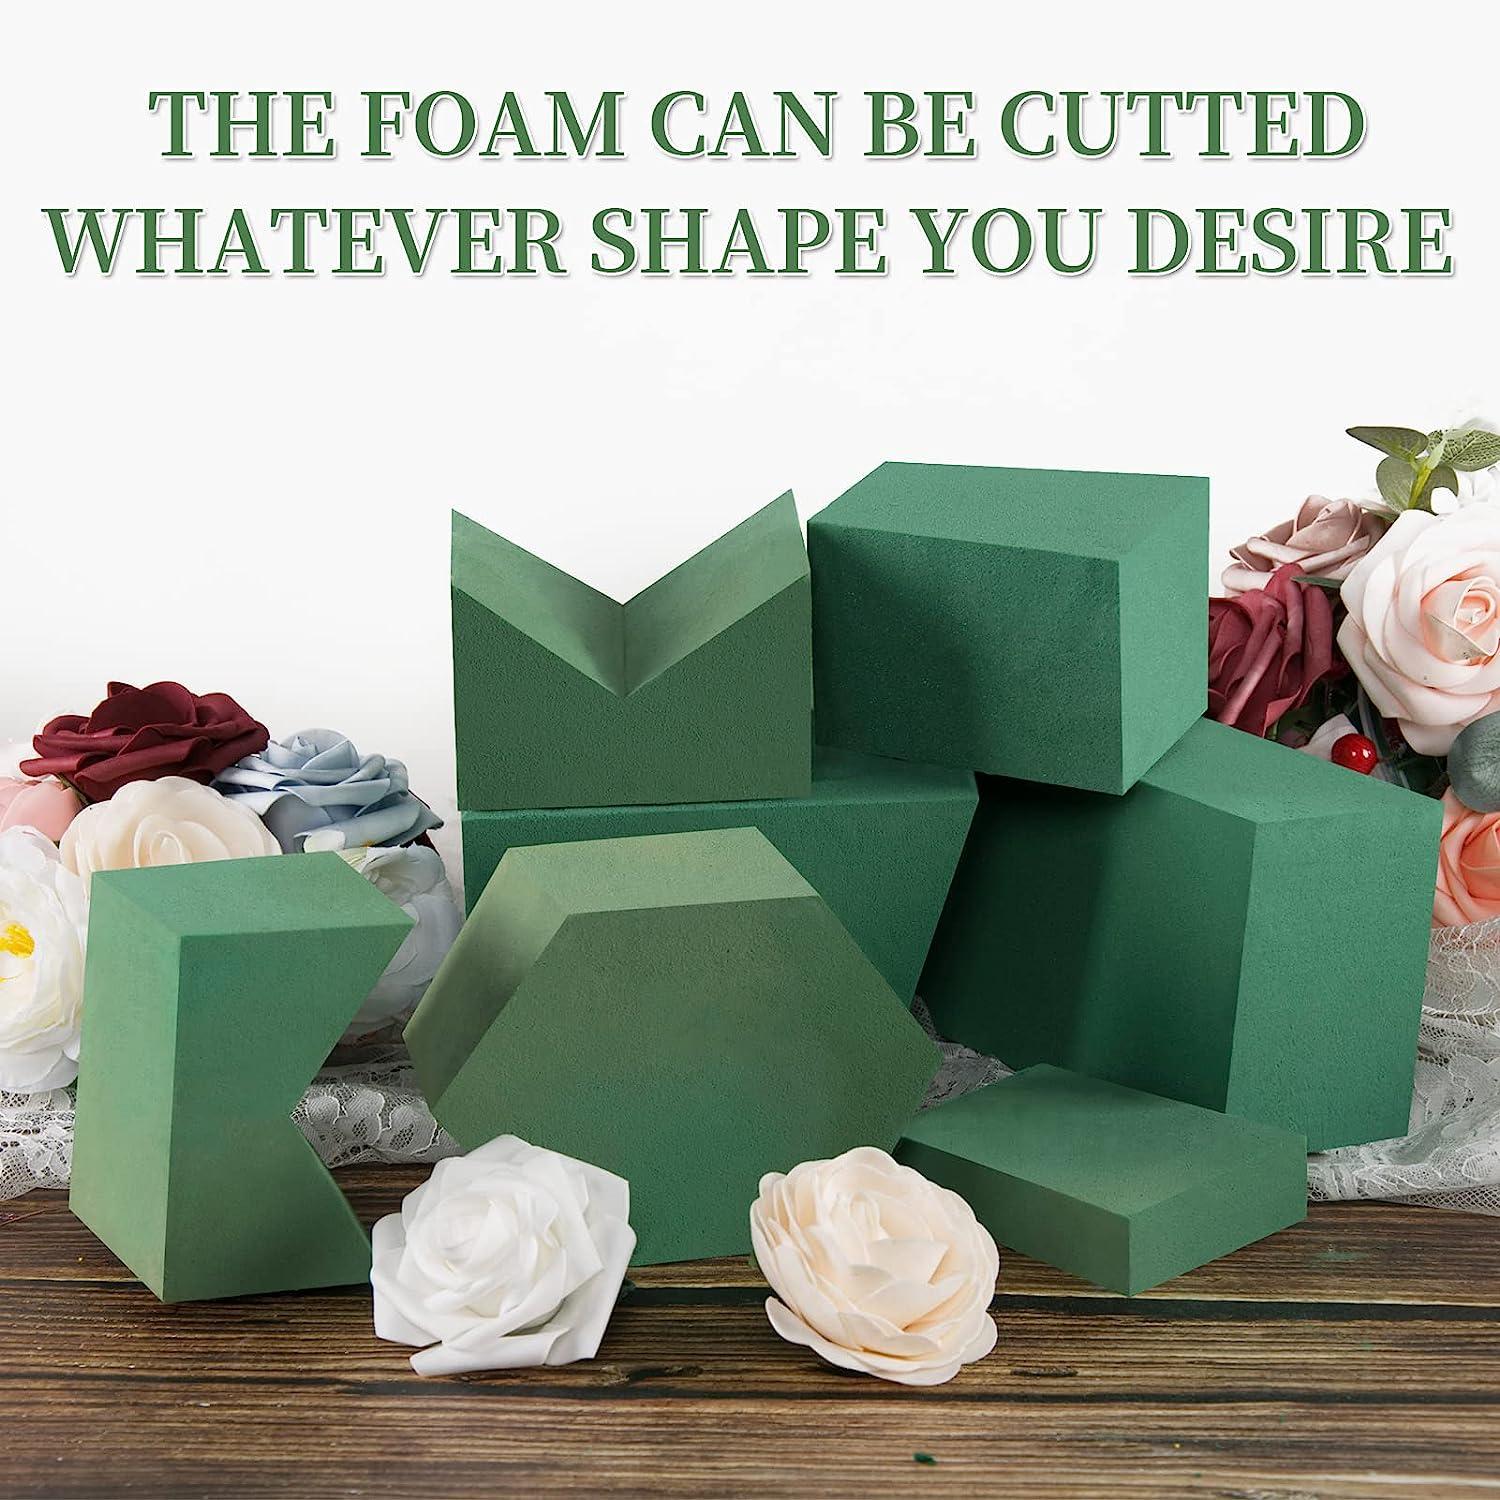 Pack of 6 Wet & Dry Floral Foam Blocks for Fresh & Artificial